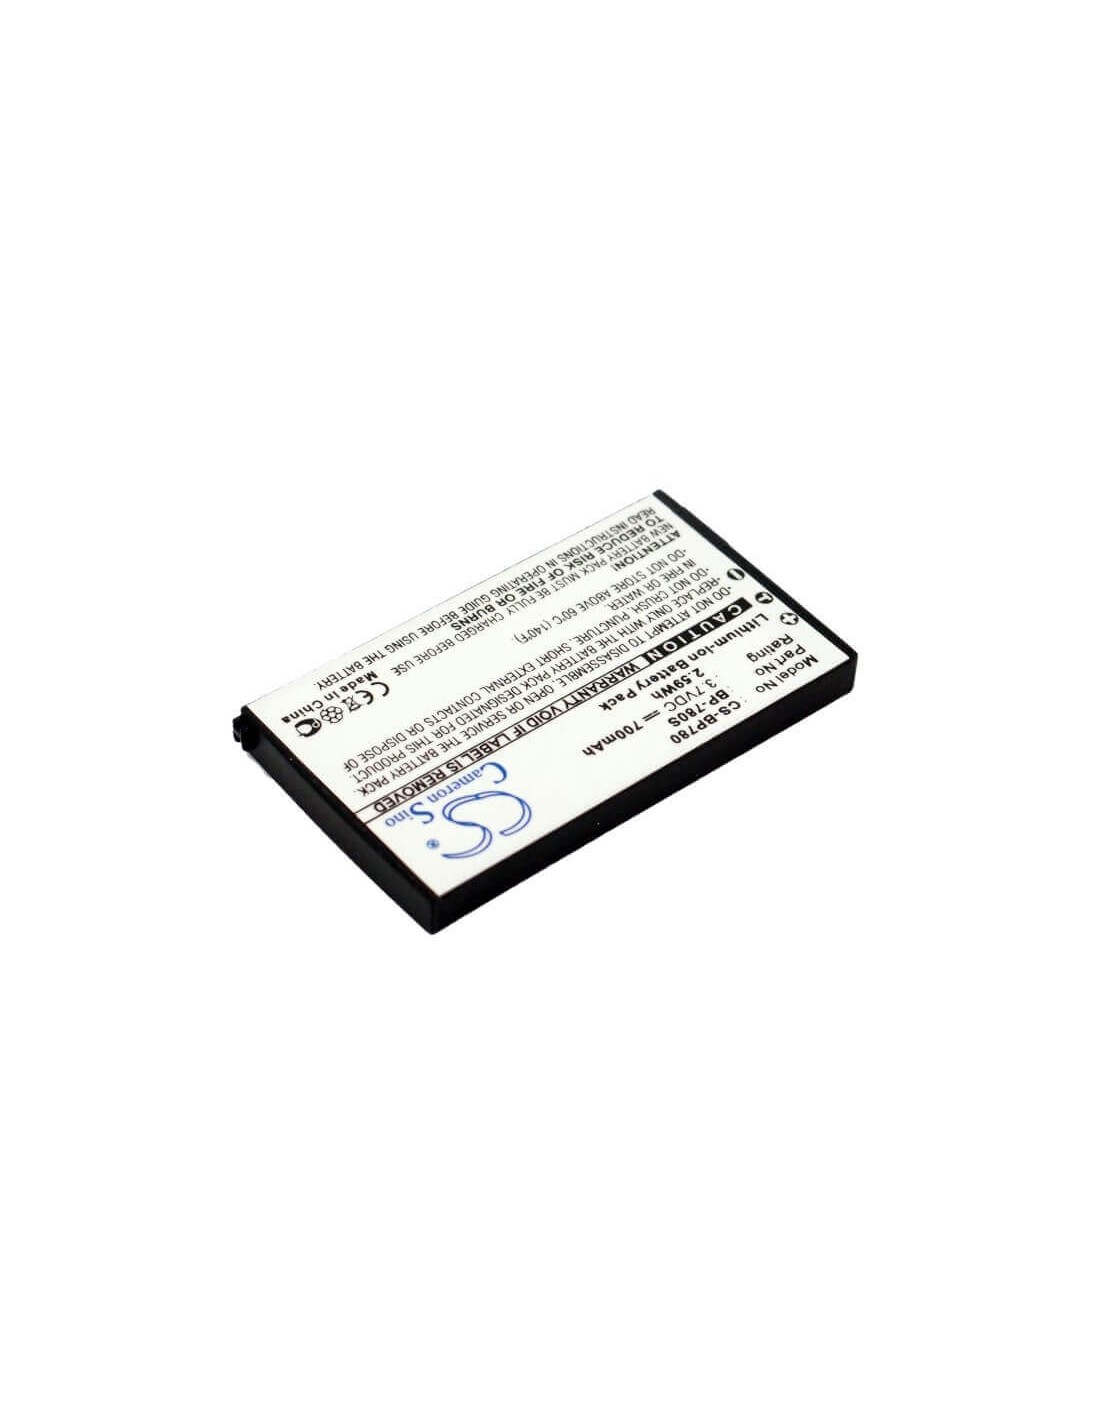 Battery for Kyocera Contax Sl300rt, Finecam Sl300r, 3.7V, 700mAh - 2.59Wh